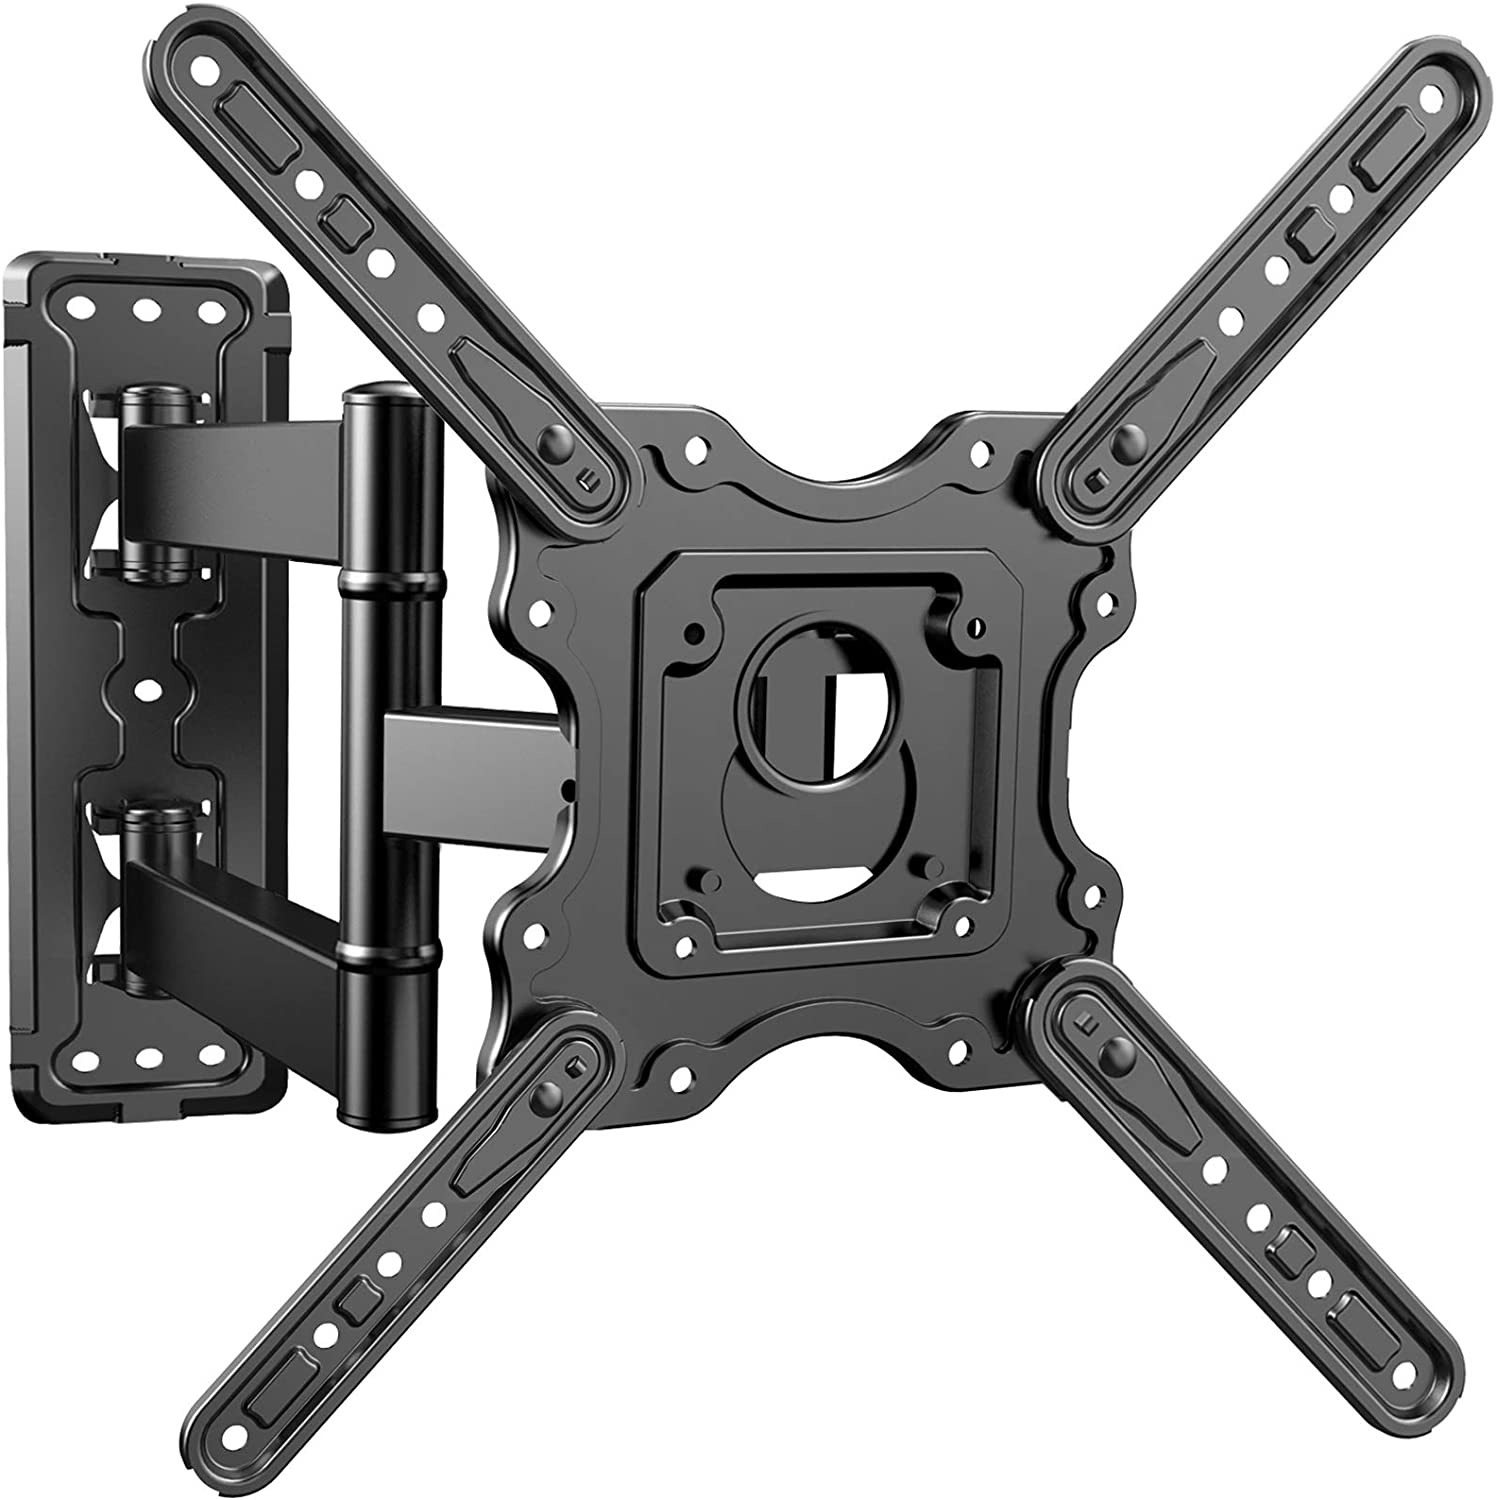 Perlesmith Heavy Duty Tilting TV Wall Mount (for 32"-55" TVs) $14.89 + Free Shipping w/ Prime or on Orders $25+